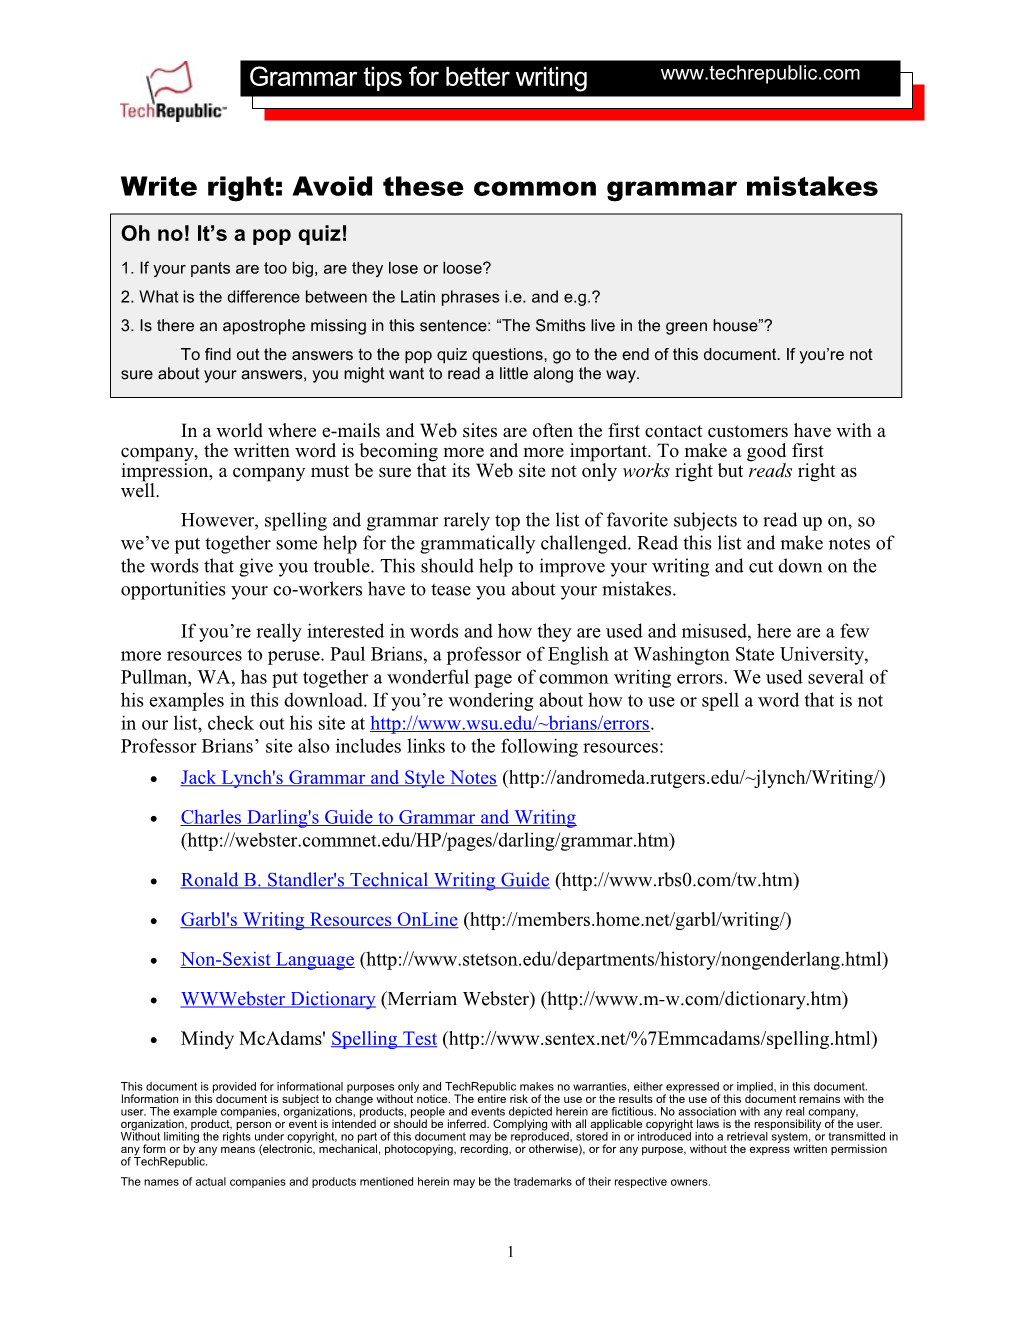 Write Right: Avoid These Common Grammar Mistakes